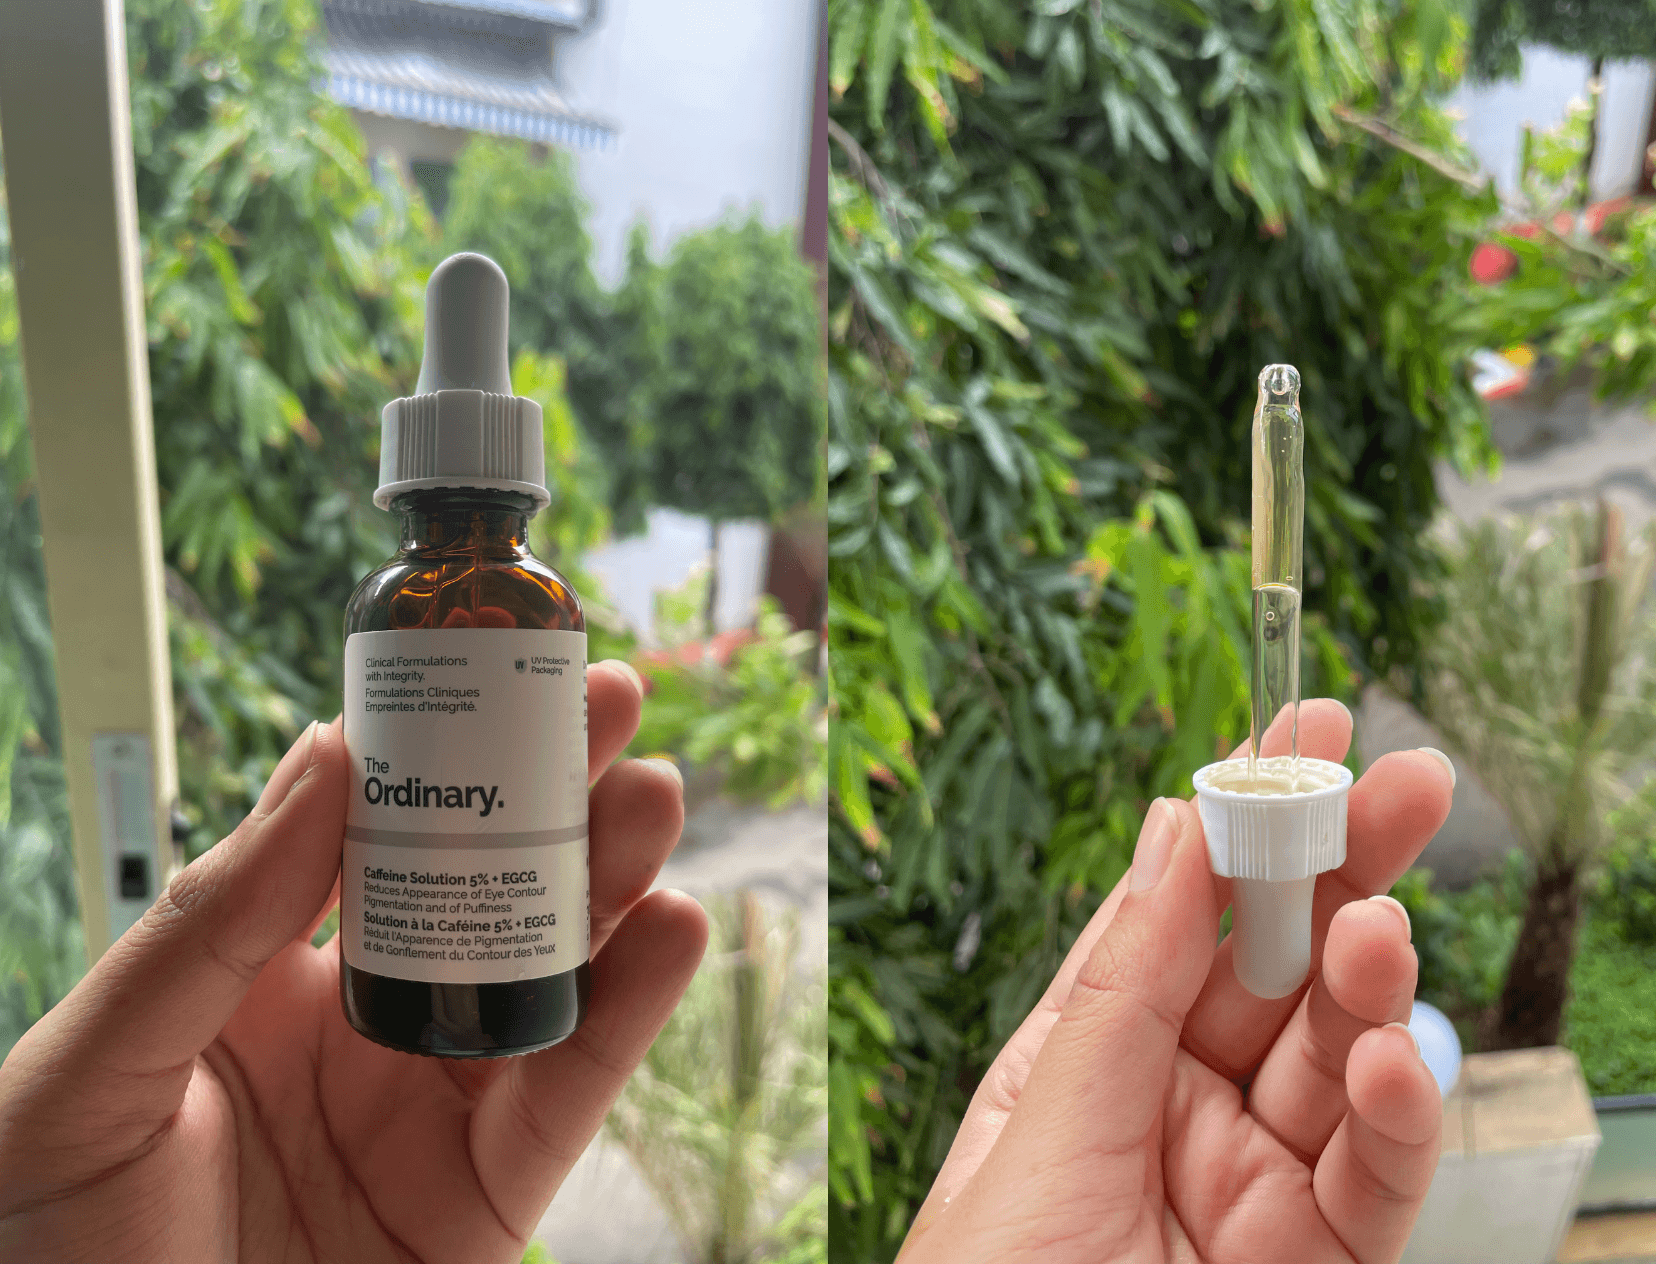 Eye Creams May Be A Scam But Trust Me, The Ordinary&#8217;s Caffeine Solution Eye Serum Actually Works